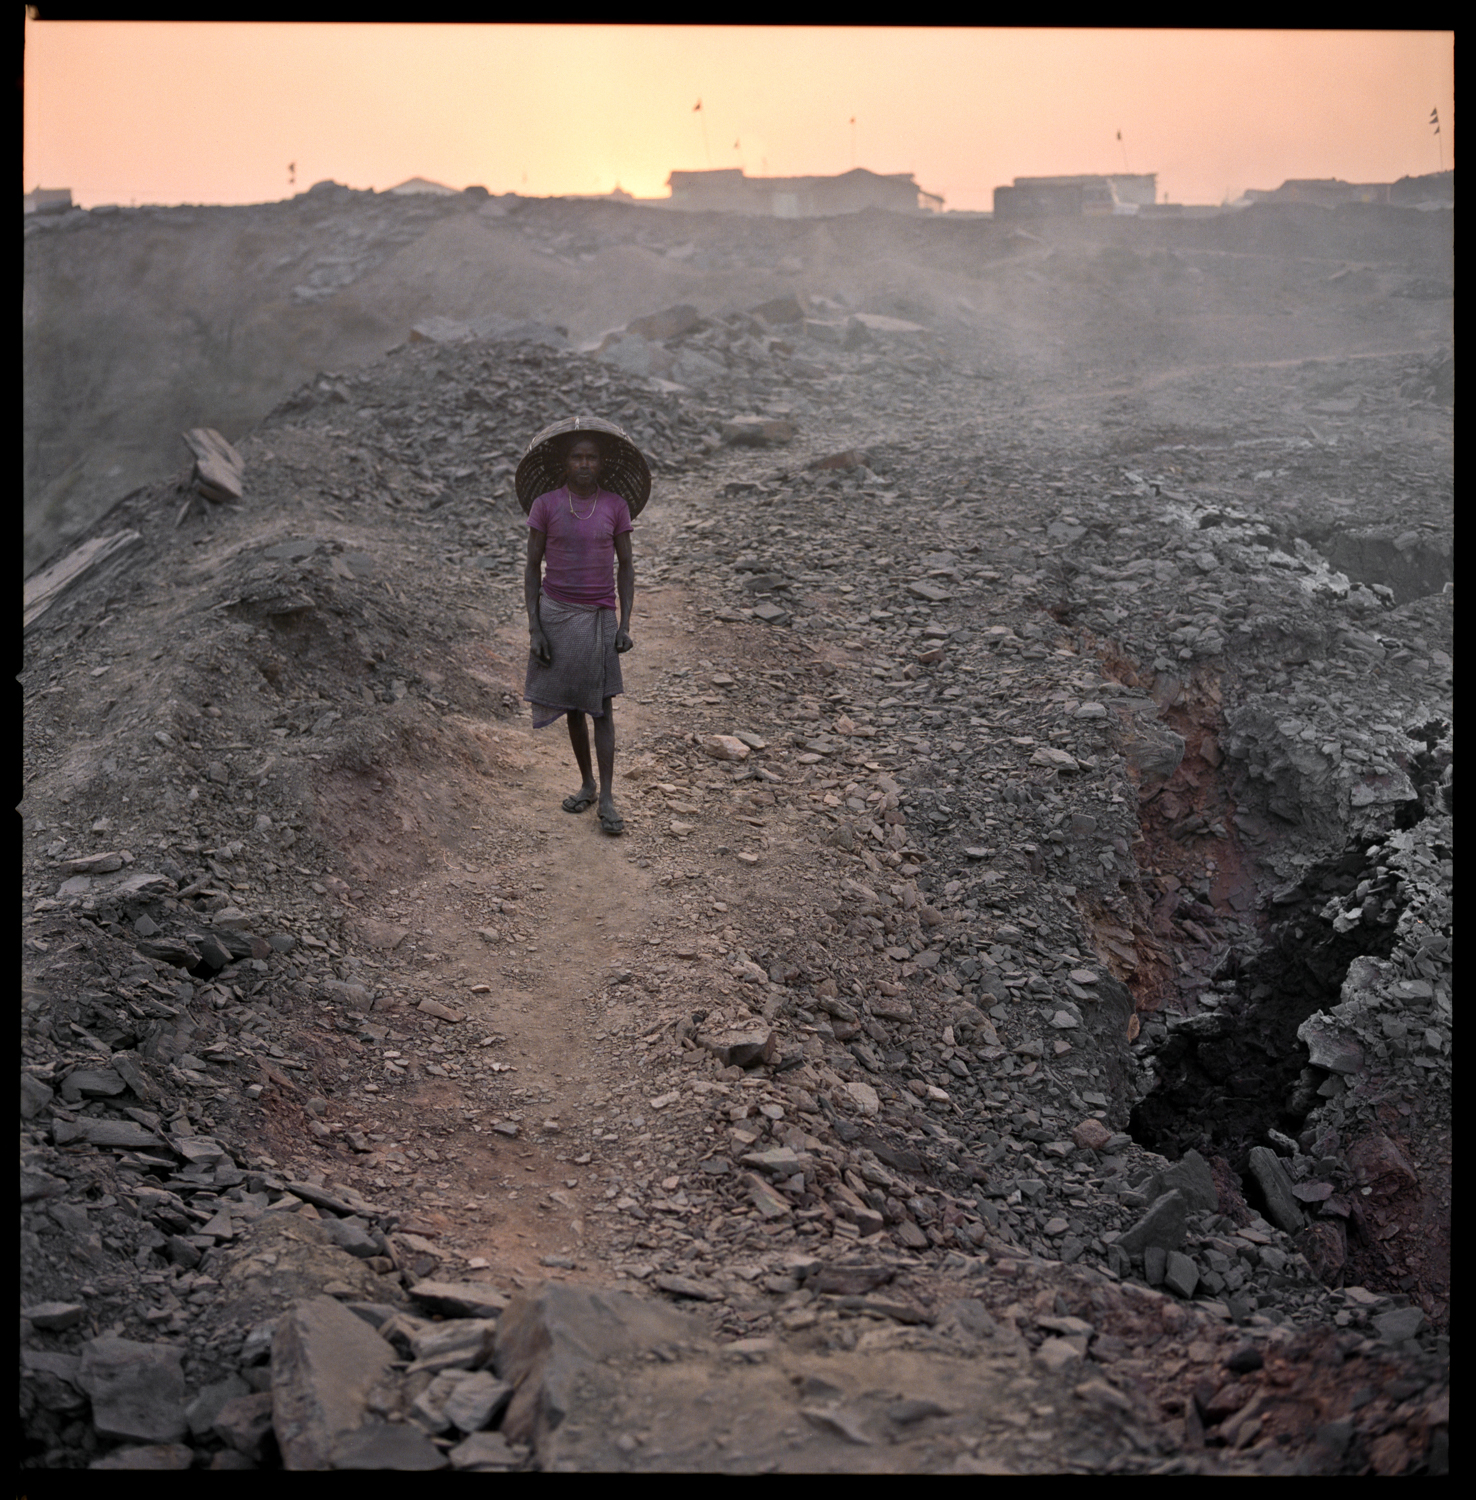   THE BURNING CITY JHARIA, INDIA | 2009-2012   Ever since I was a child, I have heard that Eskimos have dozens of different words to describe subtle nuances of white. When I arrived in Jharia, I couldn’t help wondering the same thing about the inhabi